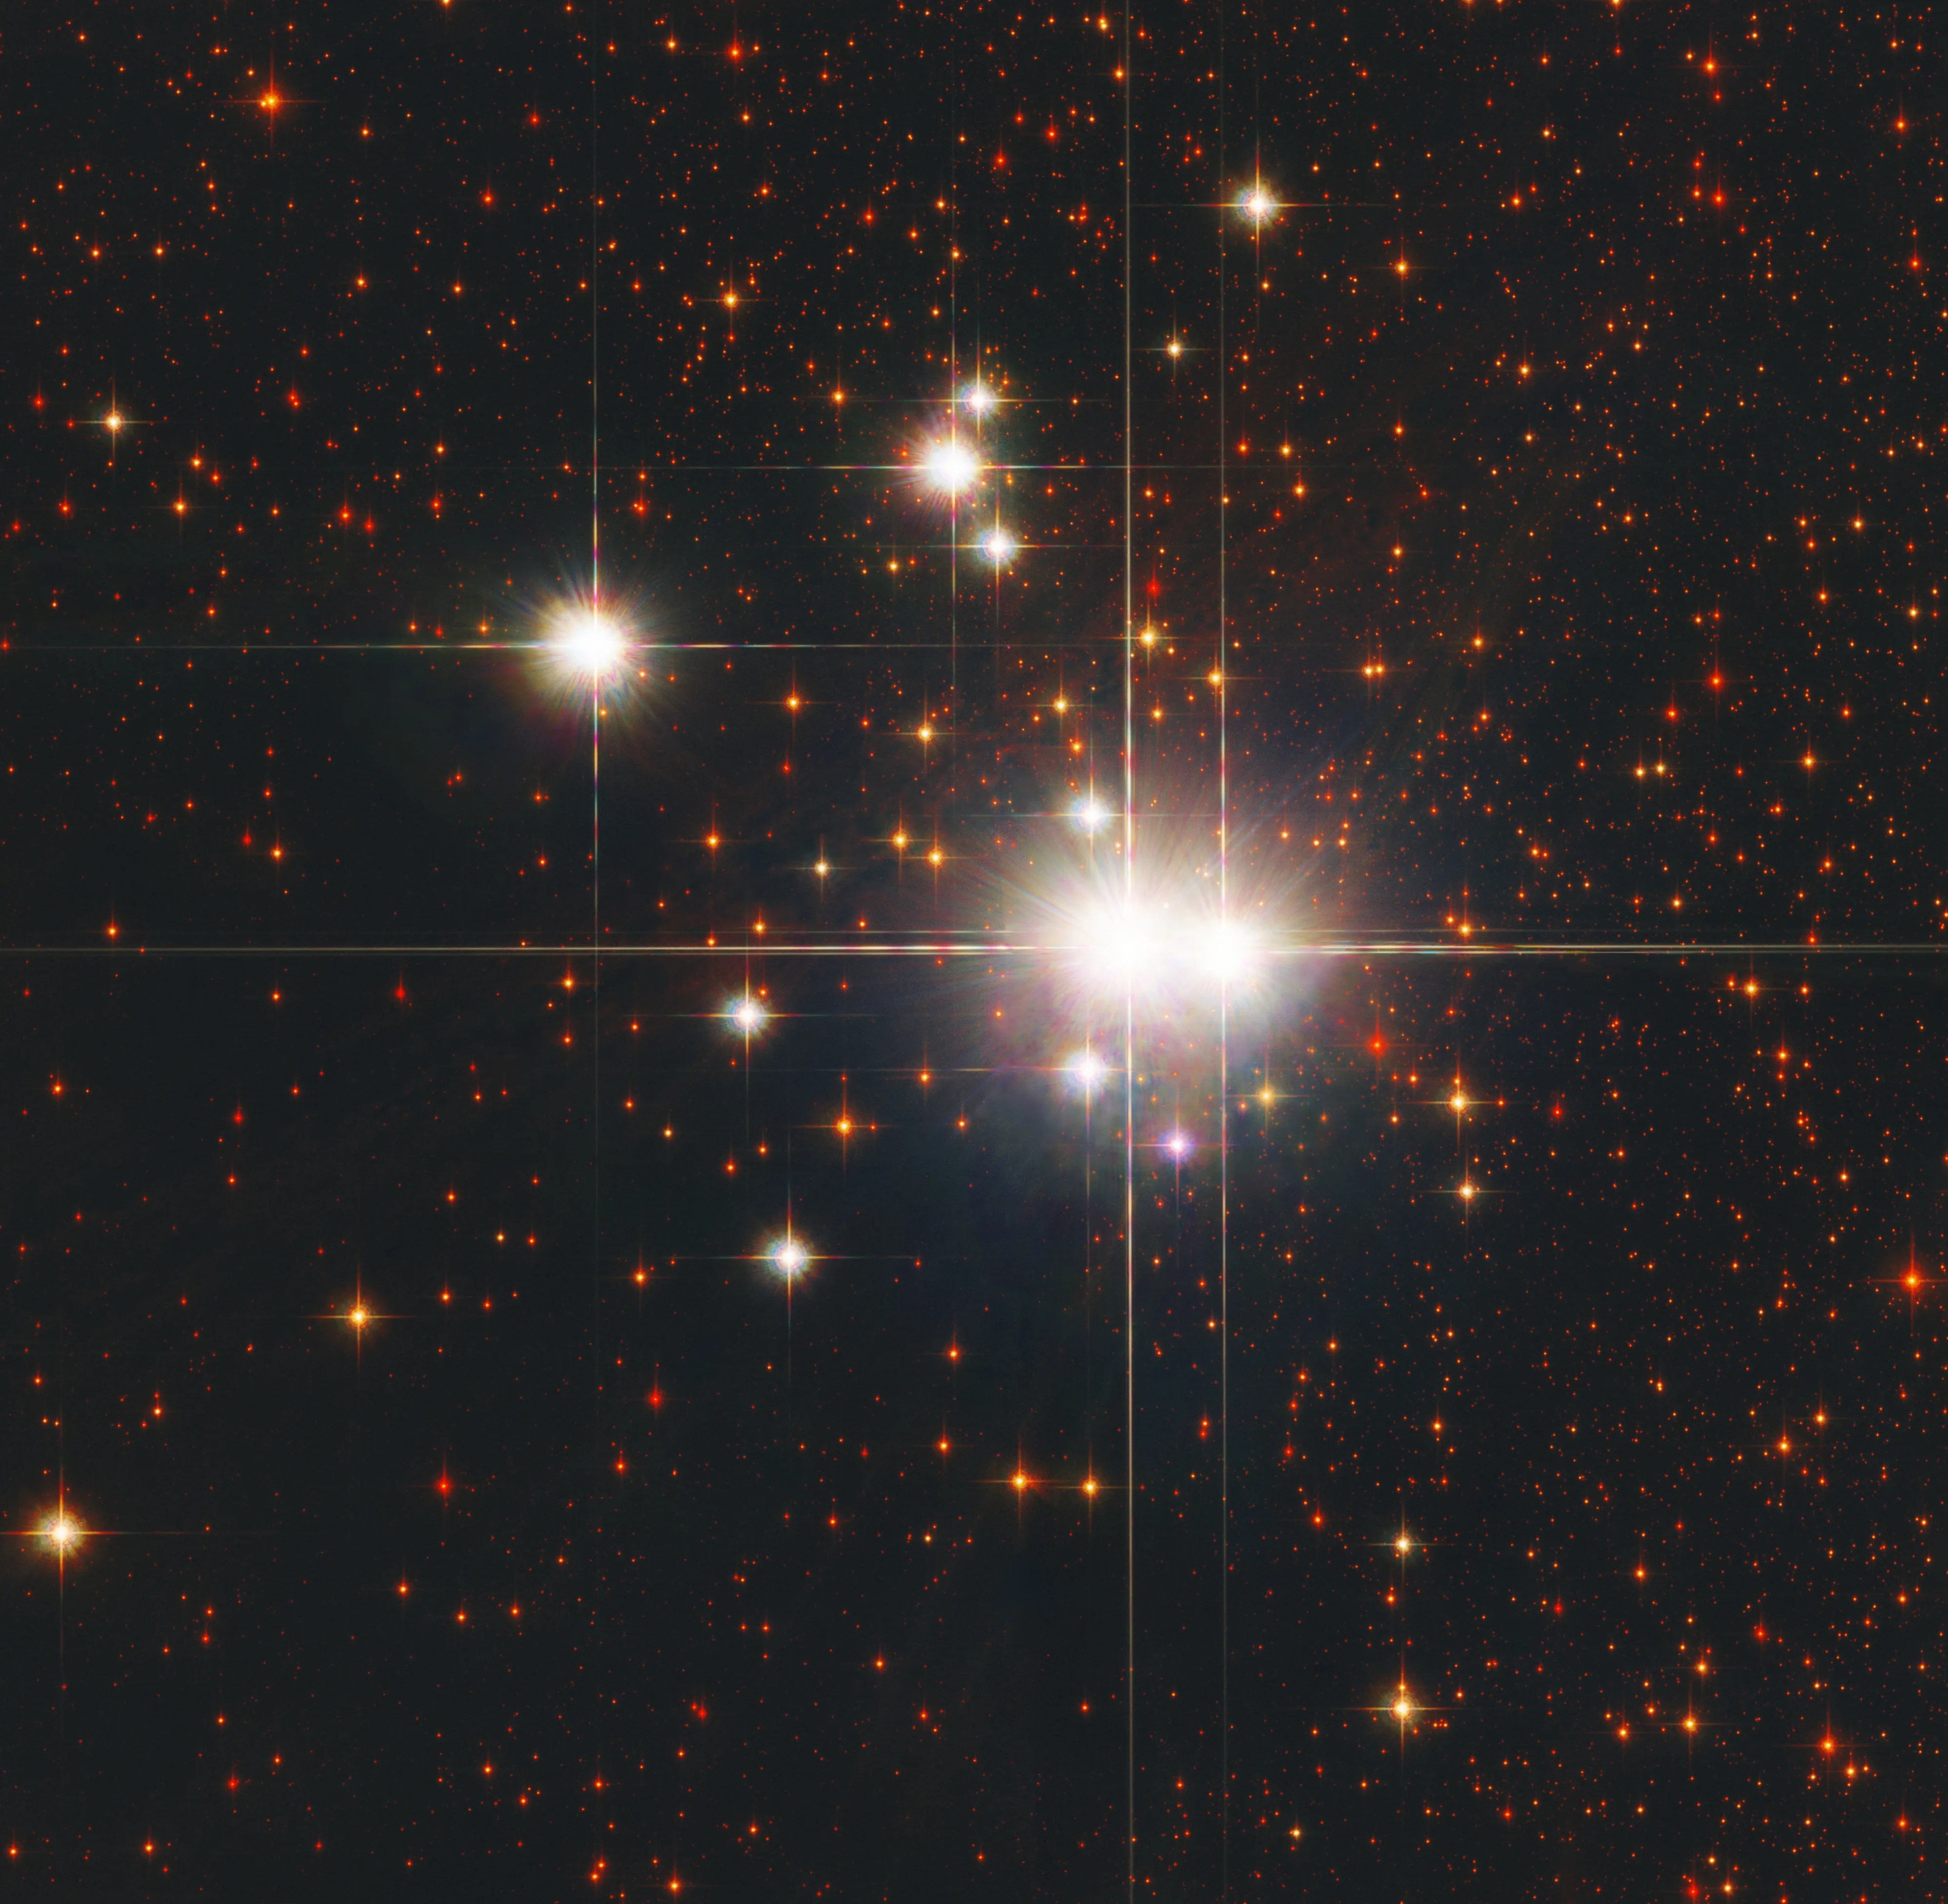 Several very bright whitish stars are clustered together, with a number of smaller and dimmer red stars around them.